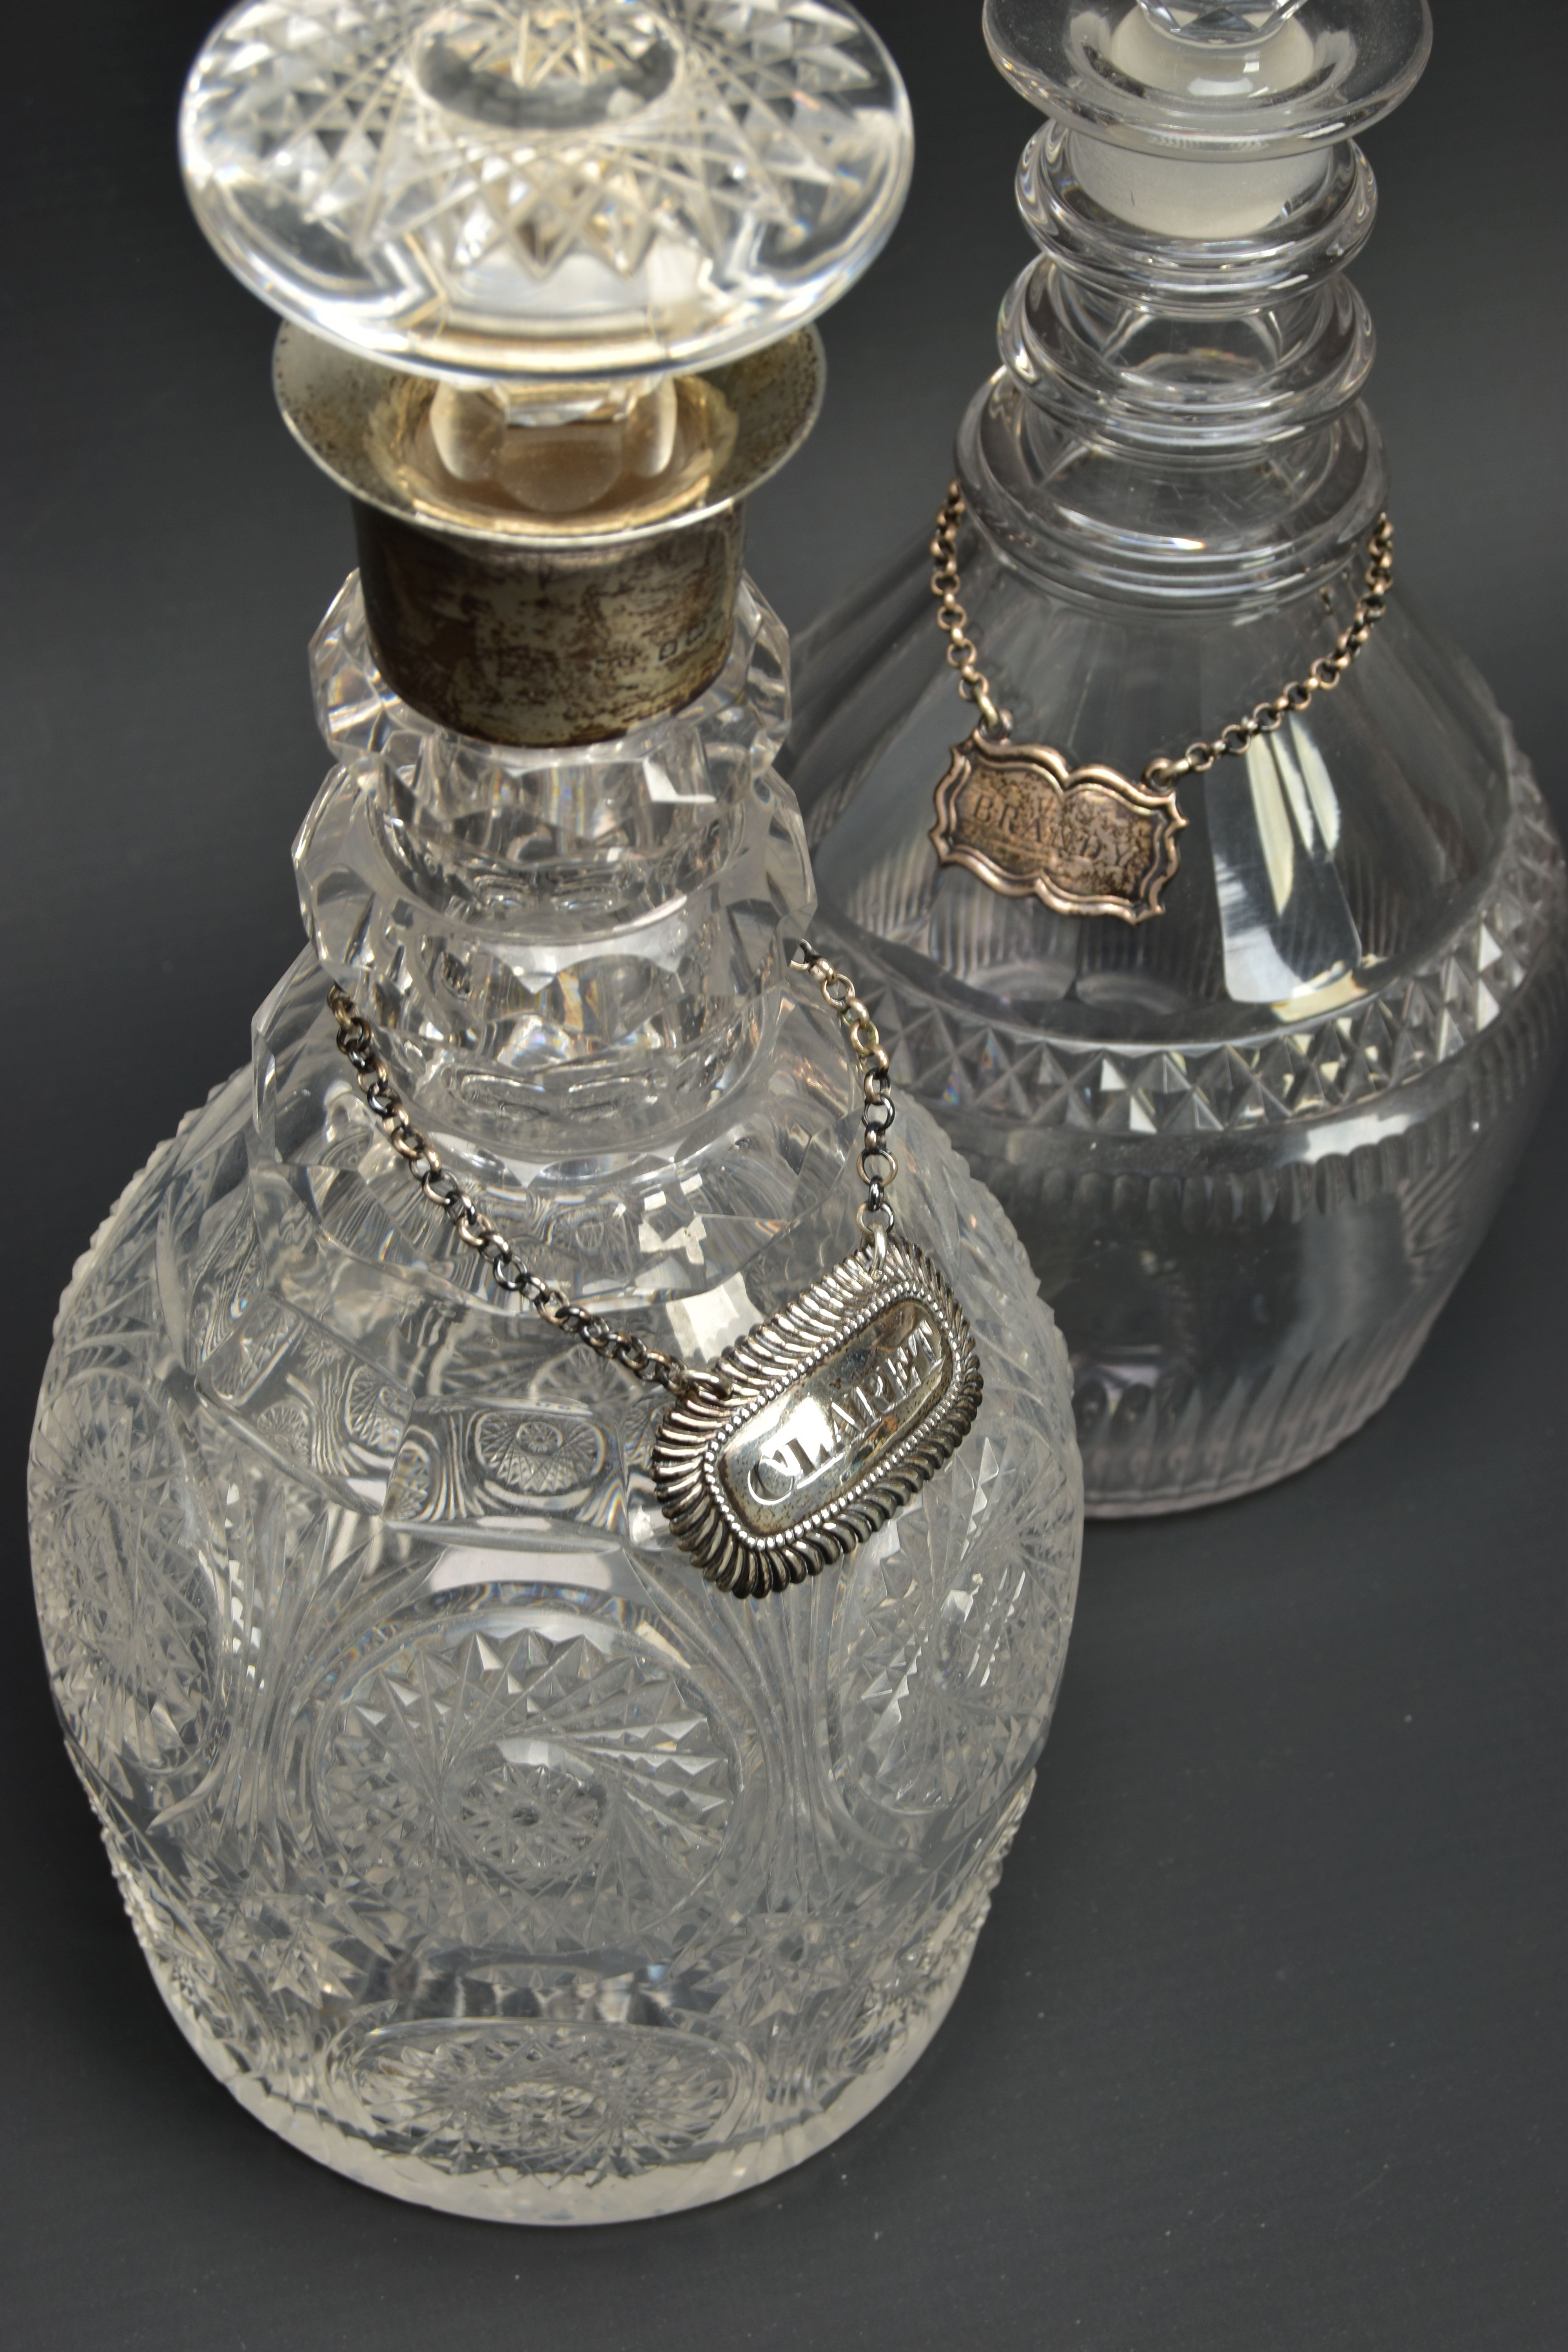 AN EARLY 19TH CENTURY PRUSSIAN SHAPED GLASS DECANTER AND A GEORGE V GLASS DECANTER, the early 19th - Image 8 of 15